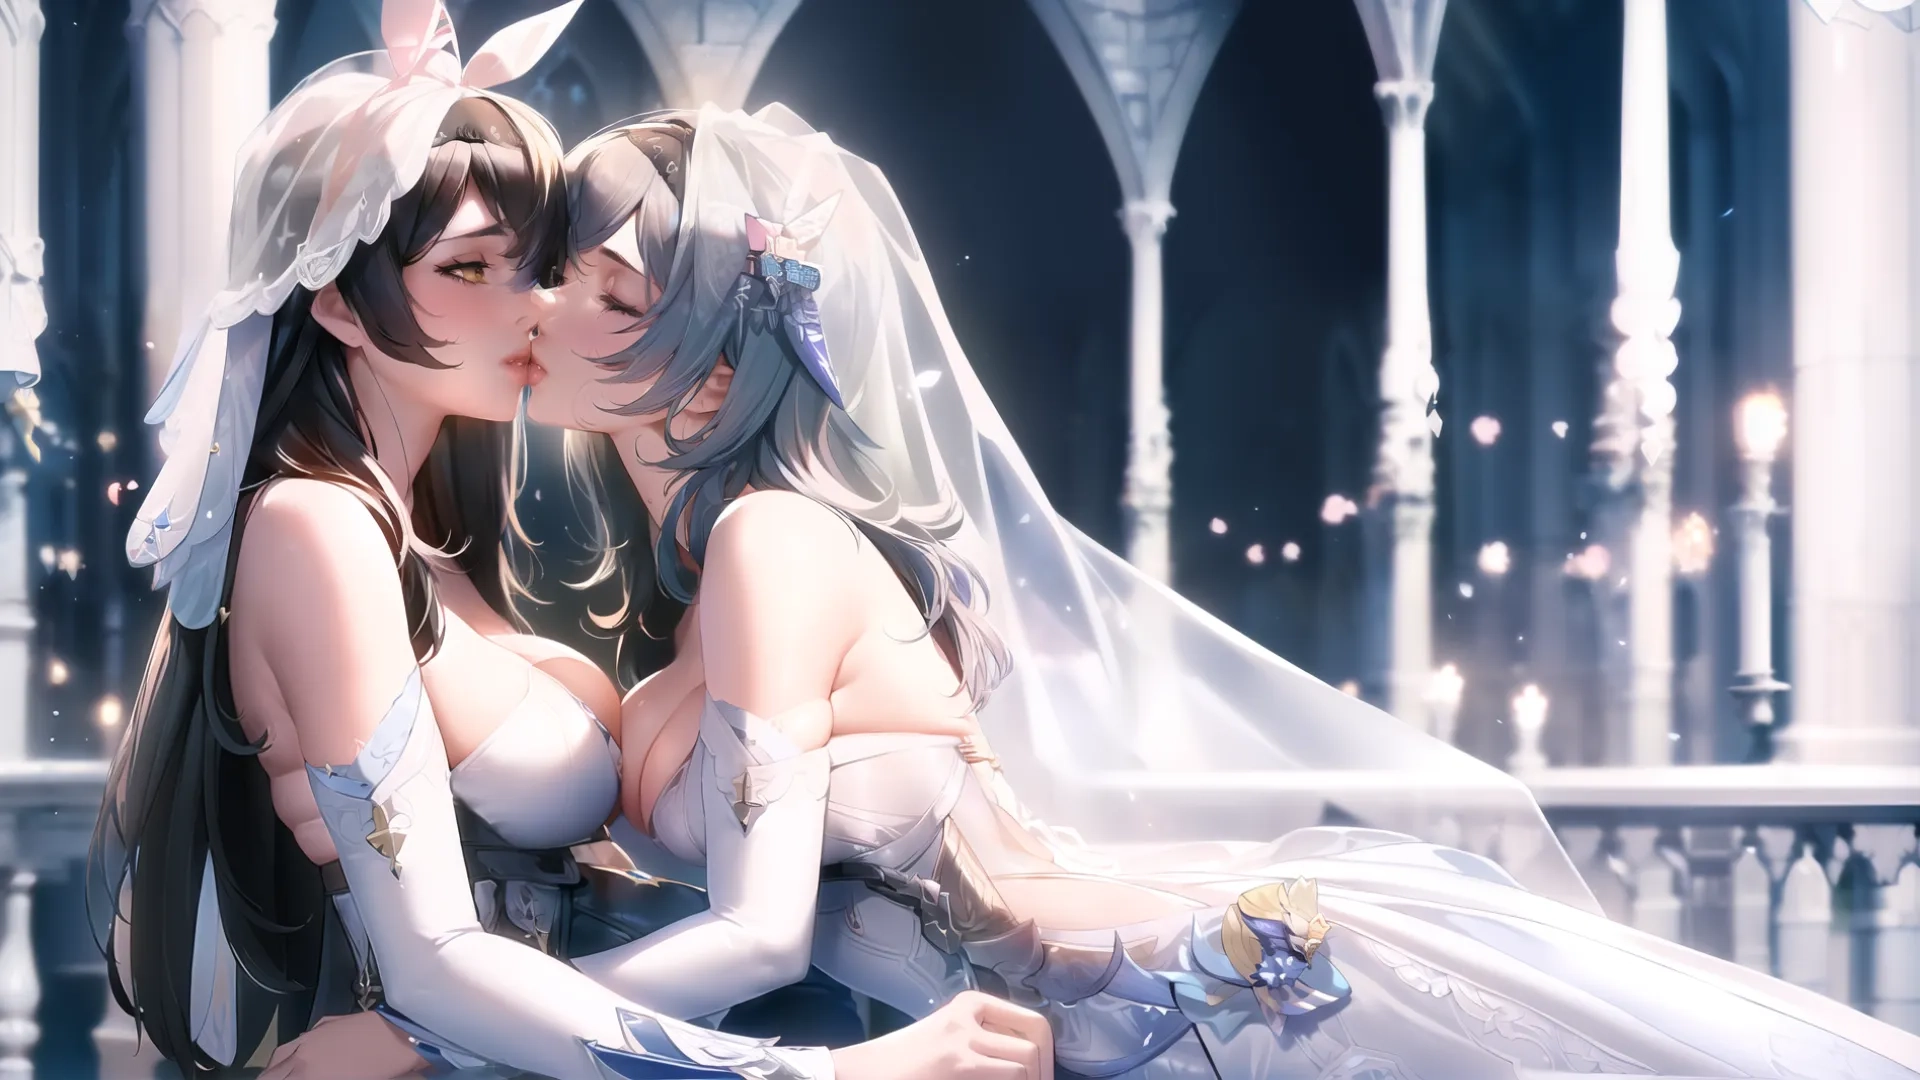 two anime girls kissing while wearing formal clothes and holding umbrellas with a white veil covering them both looking like they're having something else,
